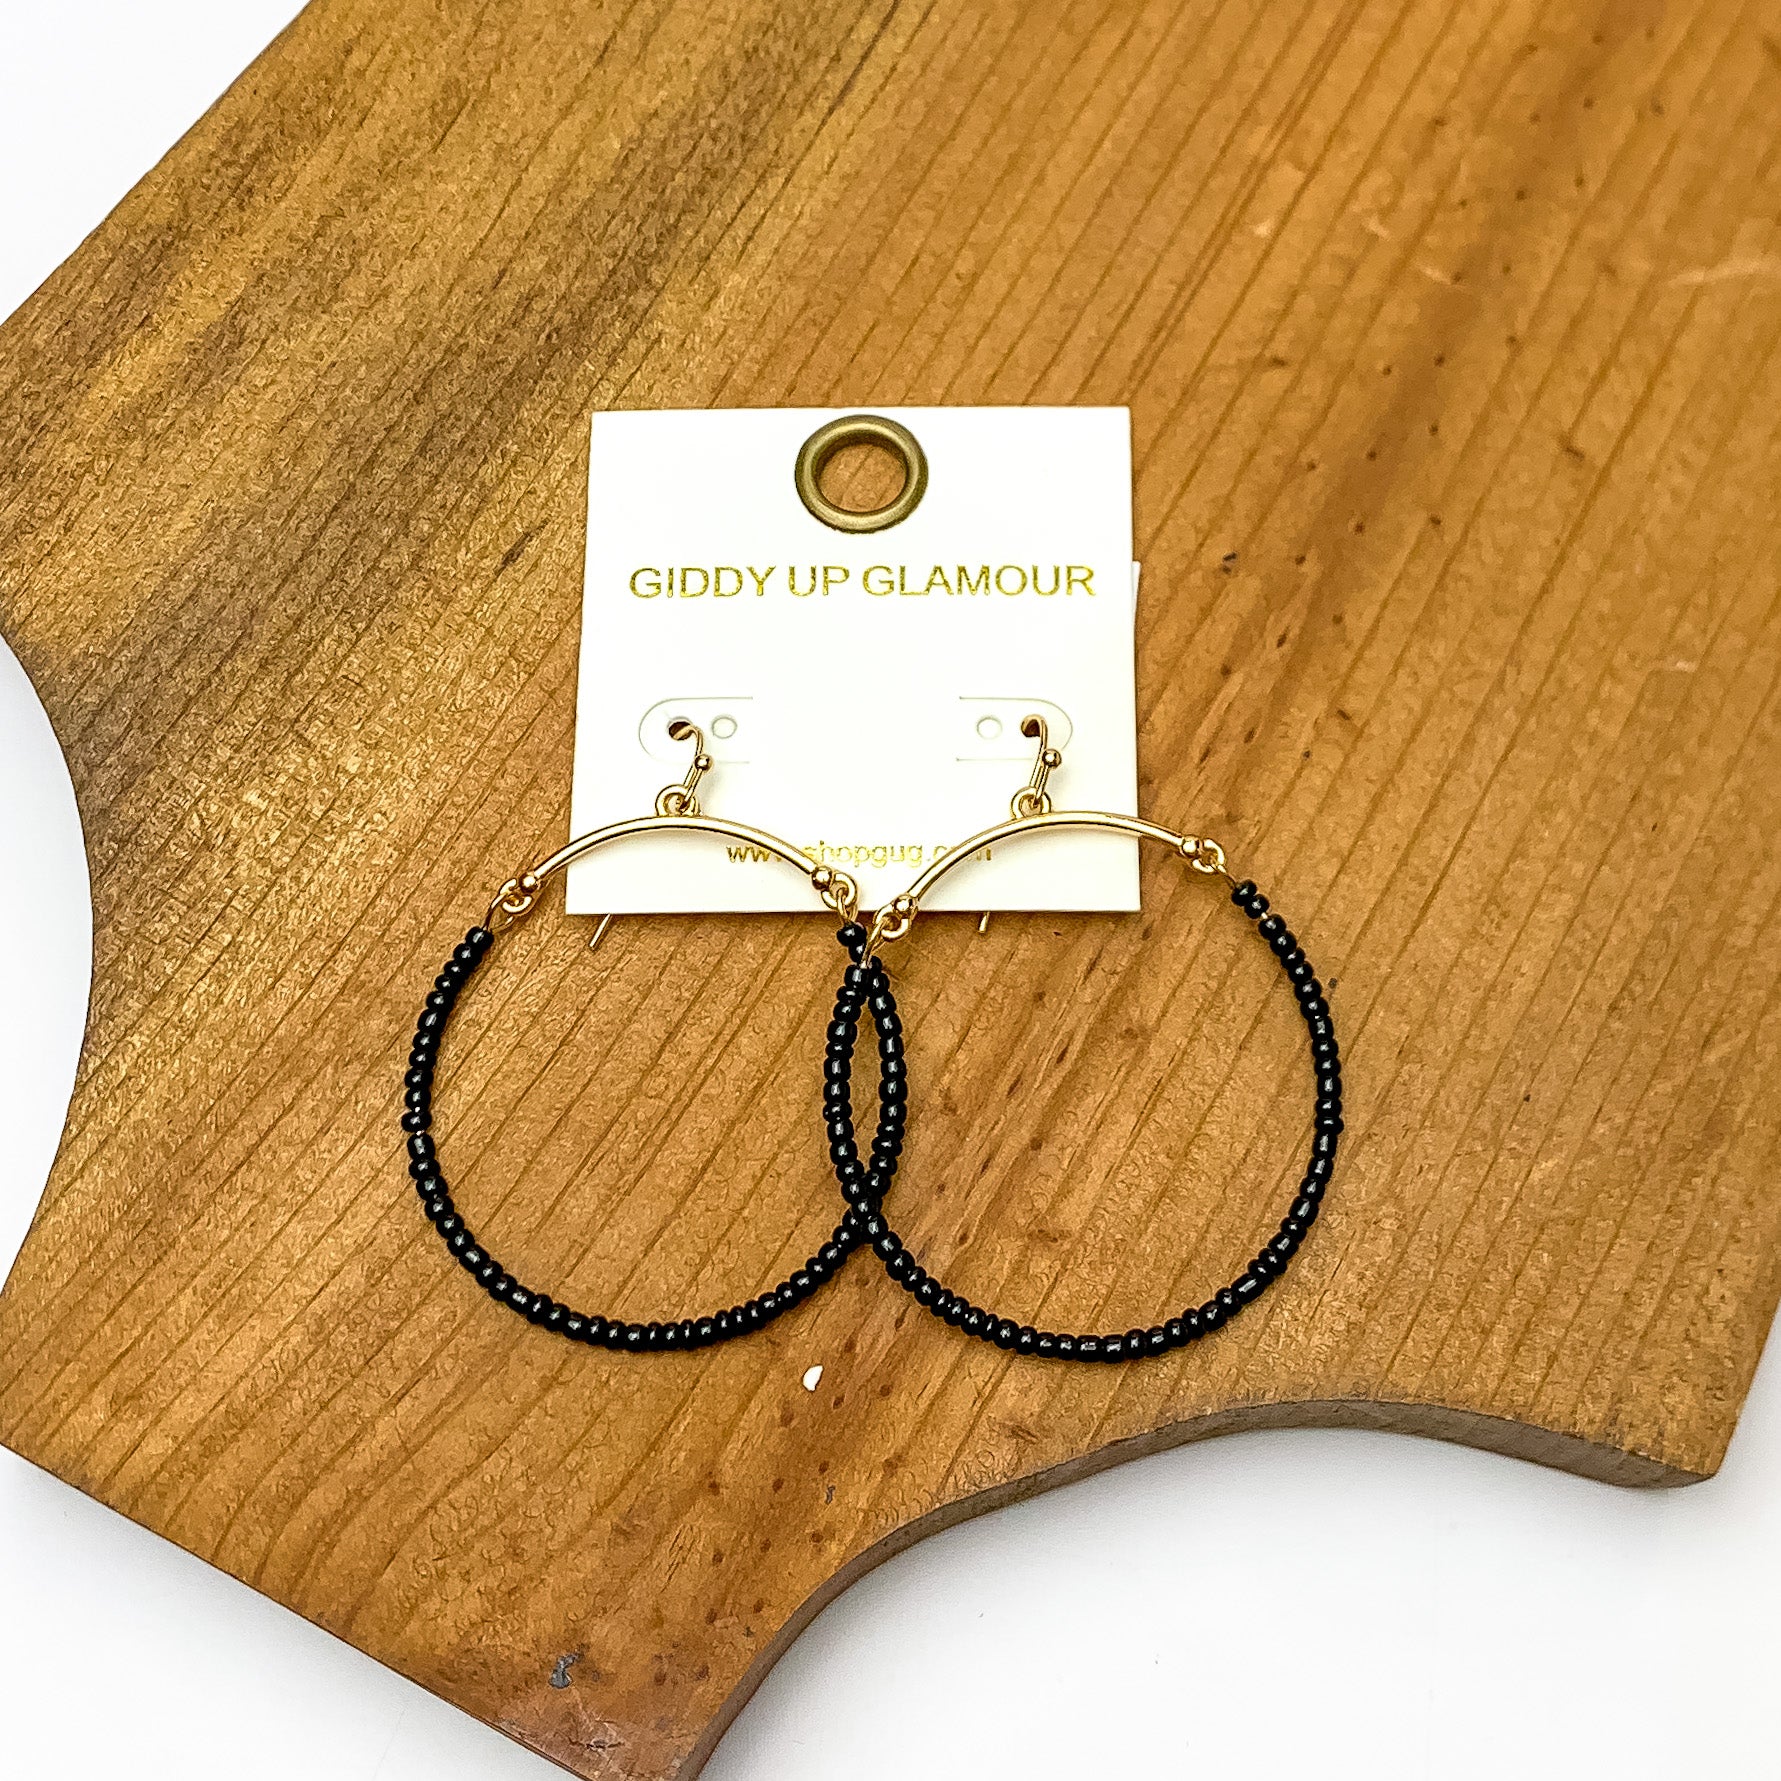 Gold Tone Hoop Earrings Beaded in Black. Pictured on a piece of wood.